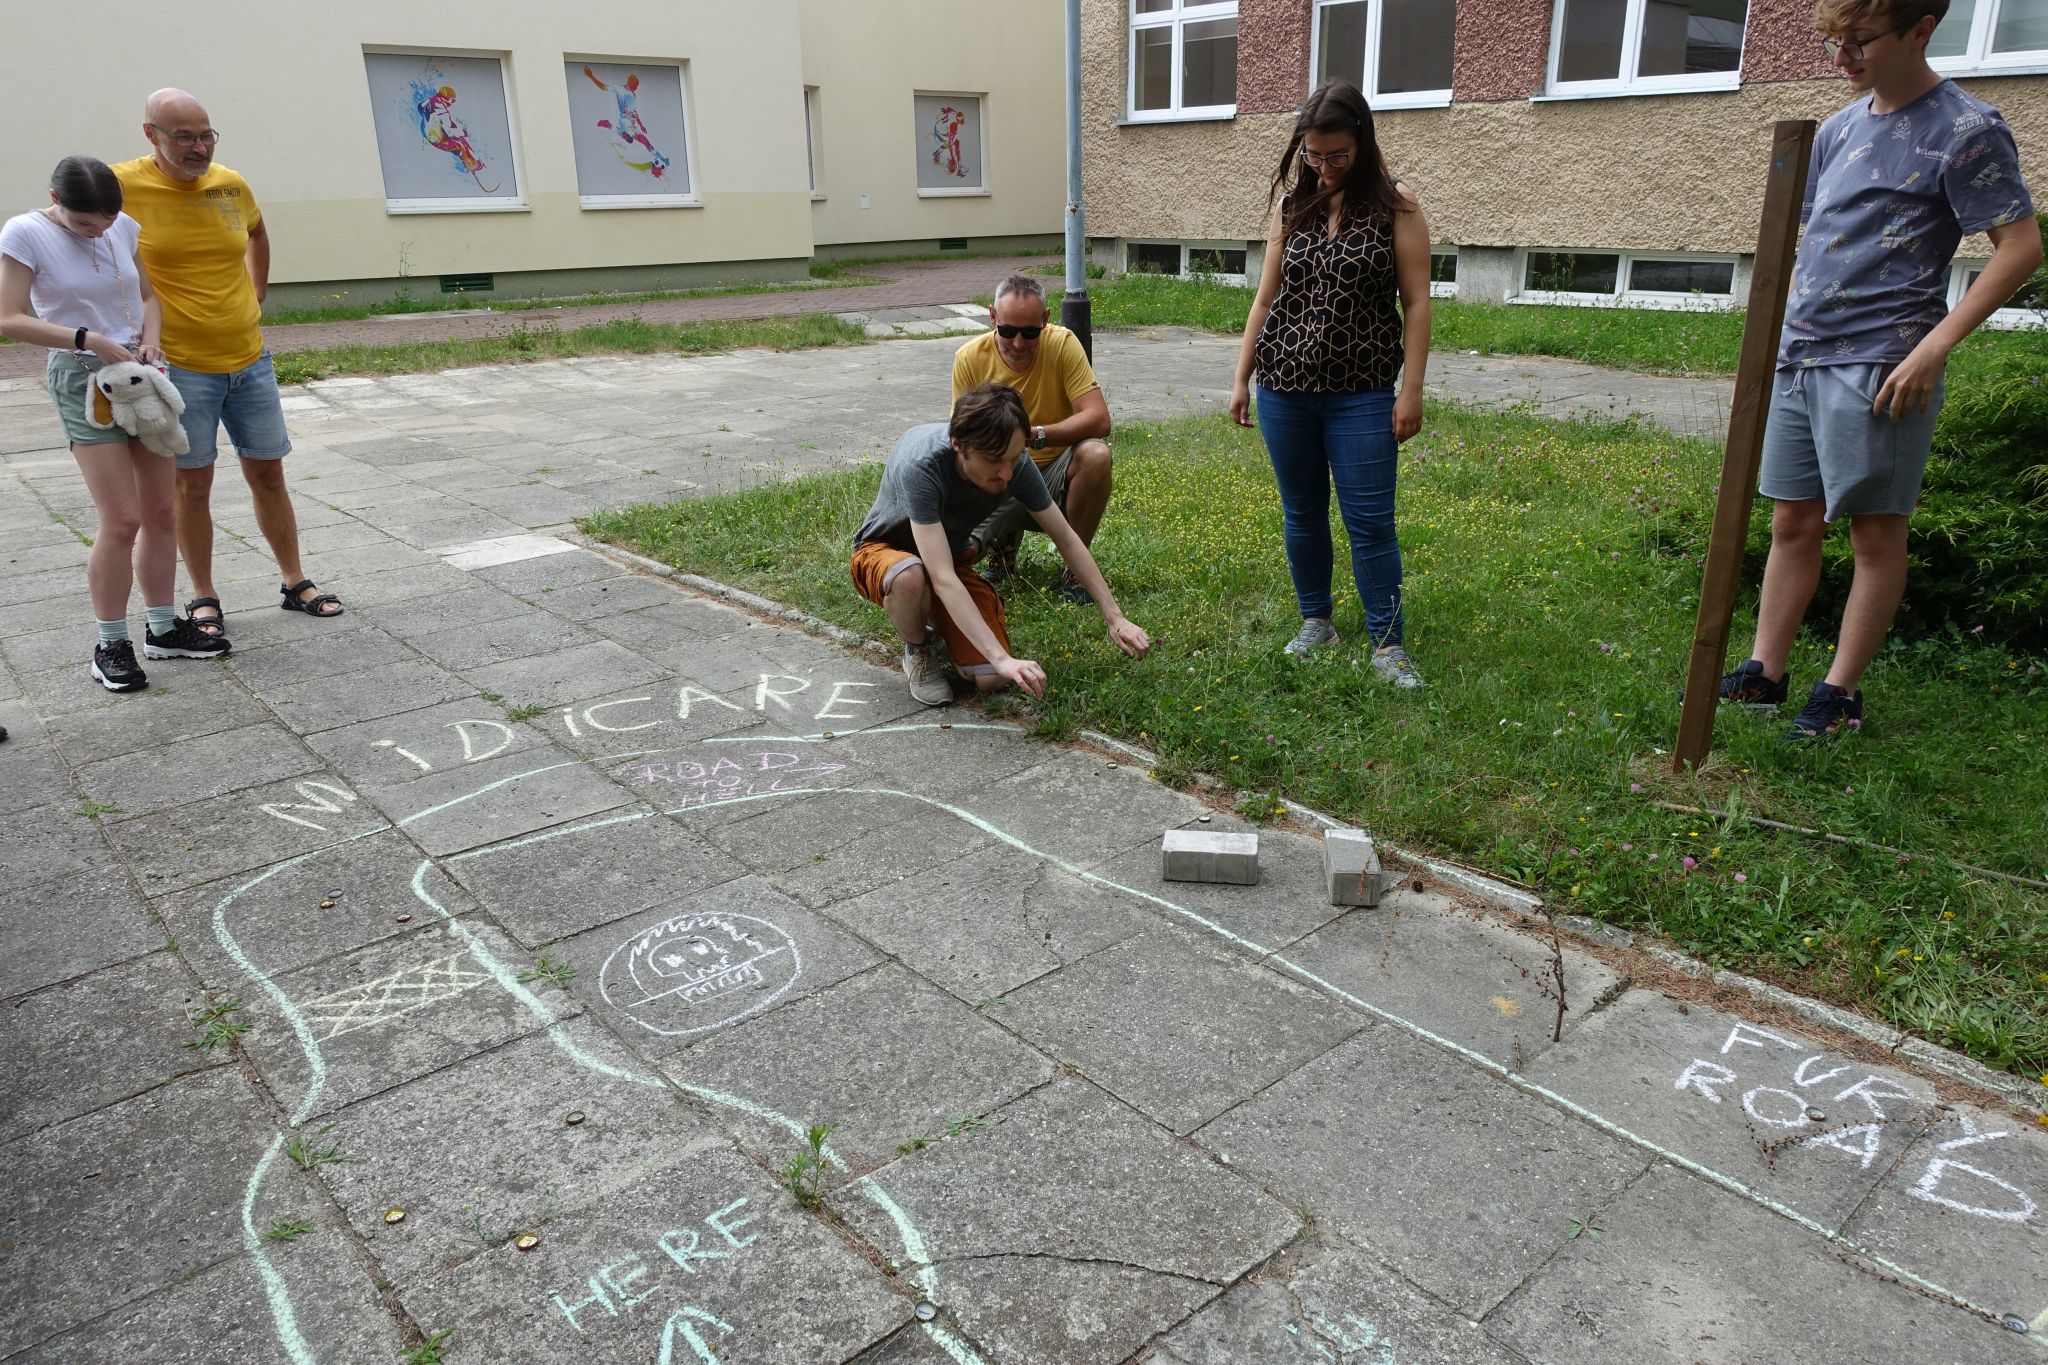 Picture shows a route drawn with chalk on the pavement. There are a four people standing, and two coruching next to it. 